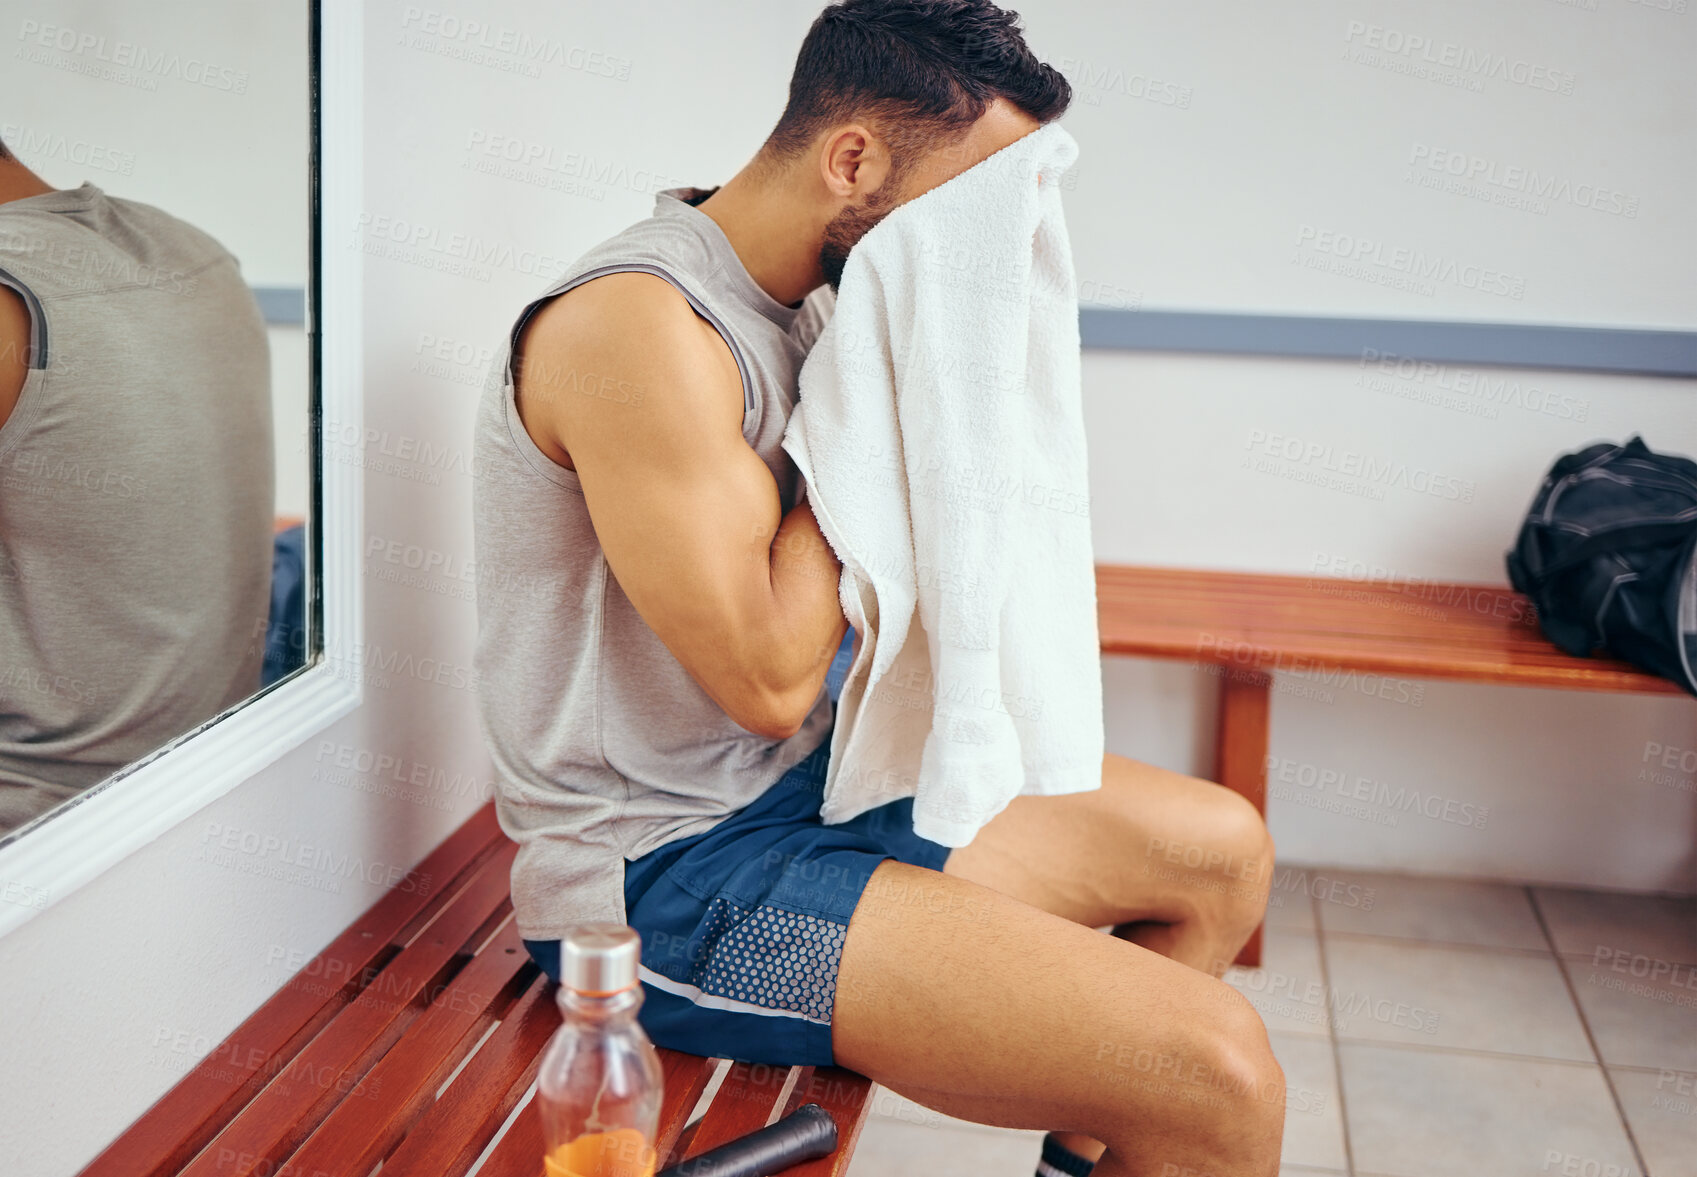 Buy stock photo Young player wiping his face with a towel. Tired man cleaning his face with a towel after a squash match. Squatch player sitting in his gym locker room. Mixed race man taking a break after a match